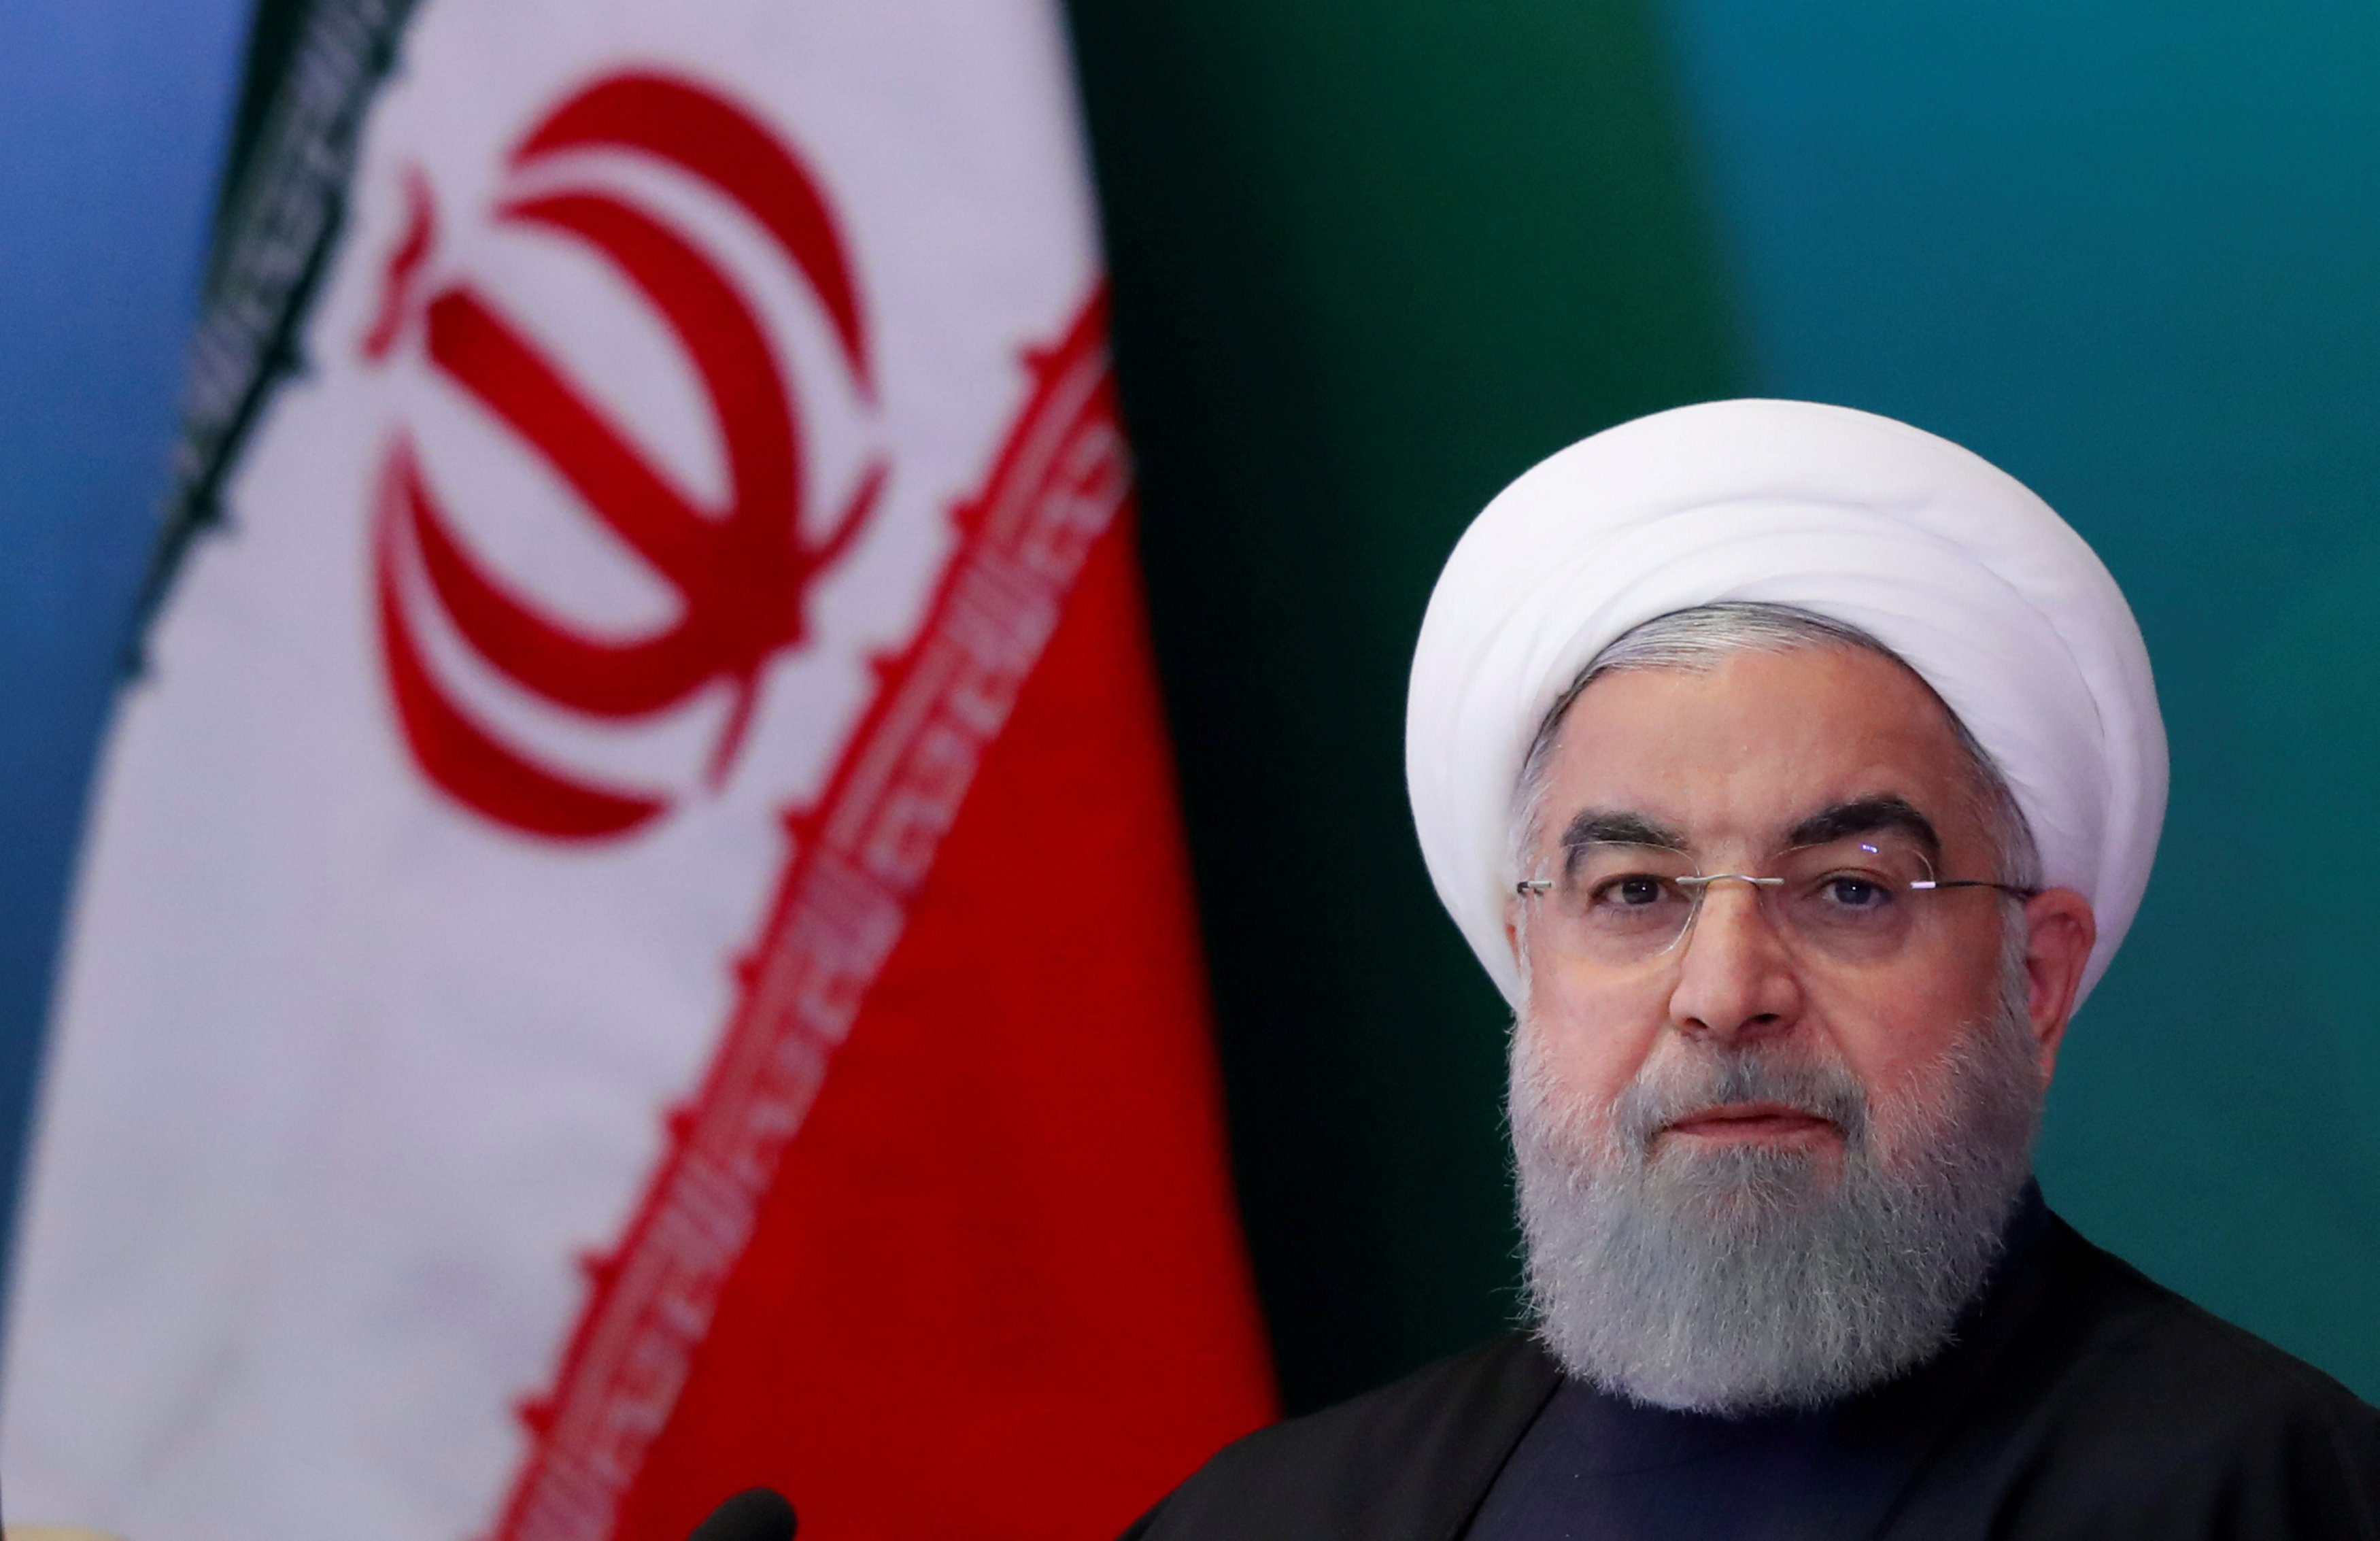 FILE PHOTO: Iranian President Hassan Rouhani attends a meeting with Muslim leaders and scholars in Hyderabad